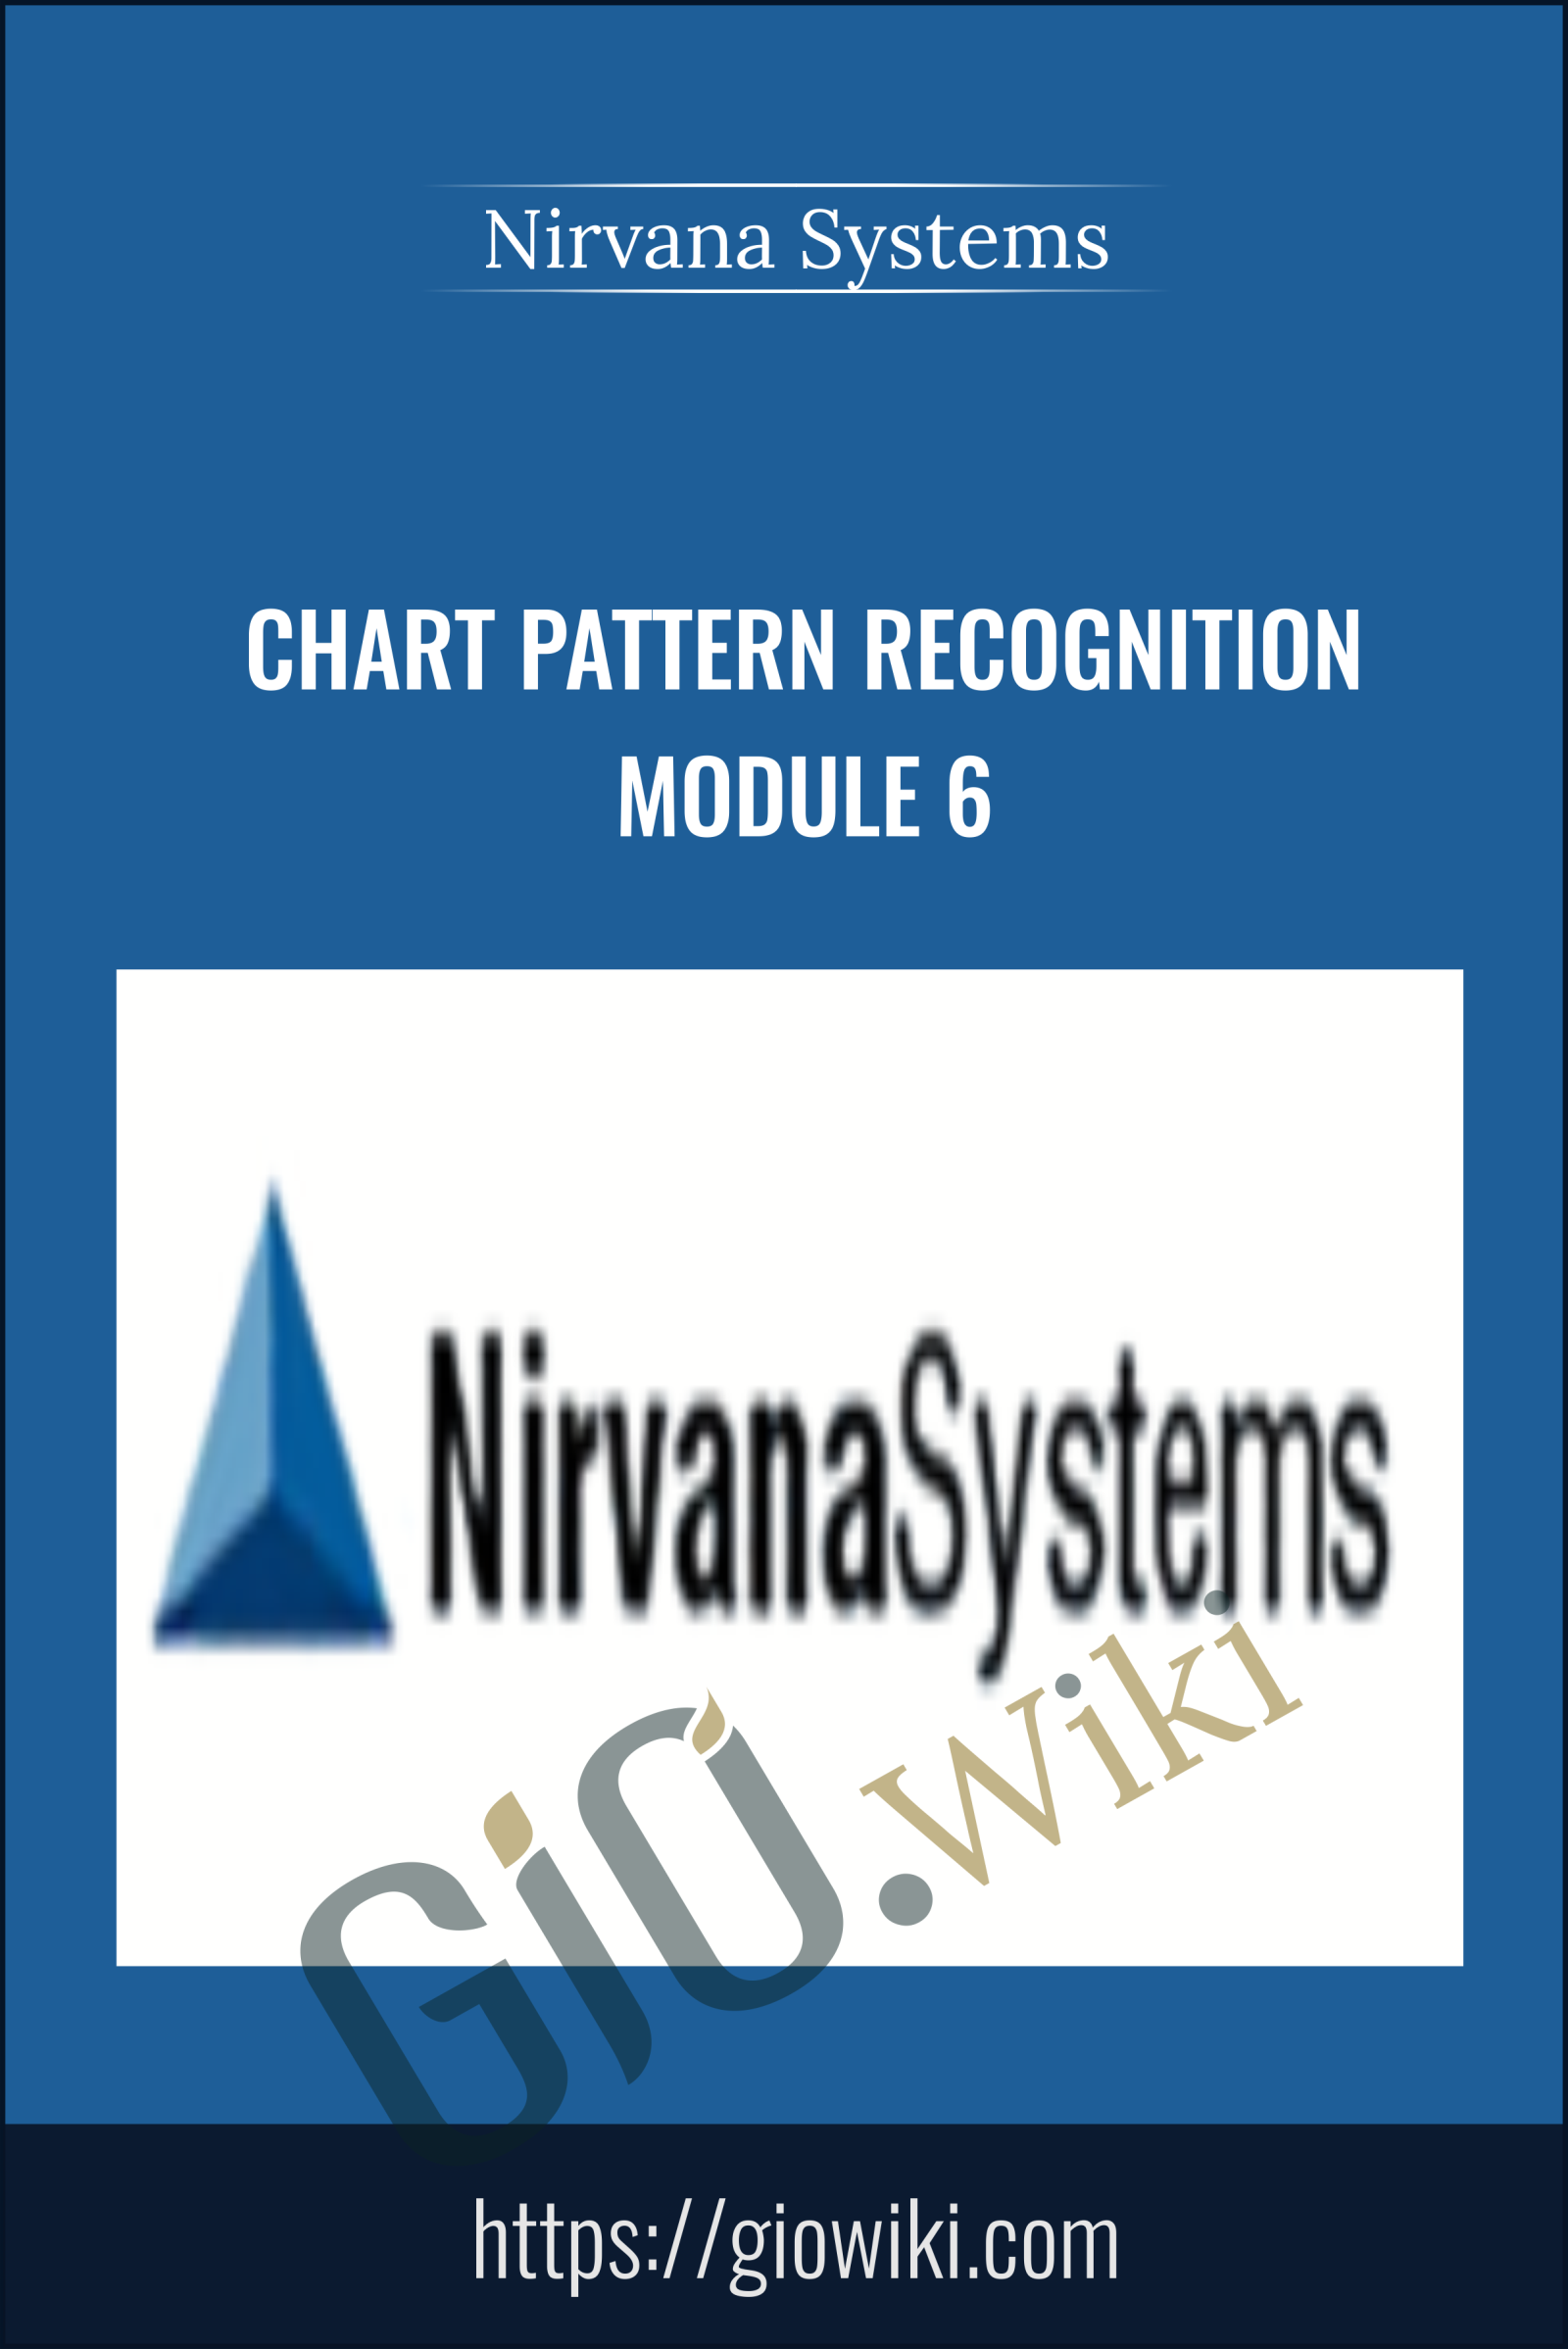 Chart Pattern Recognition Module 6 - Nirvana Systems